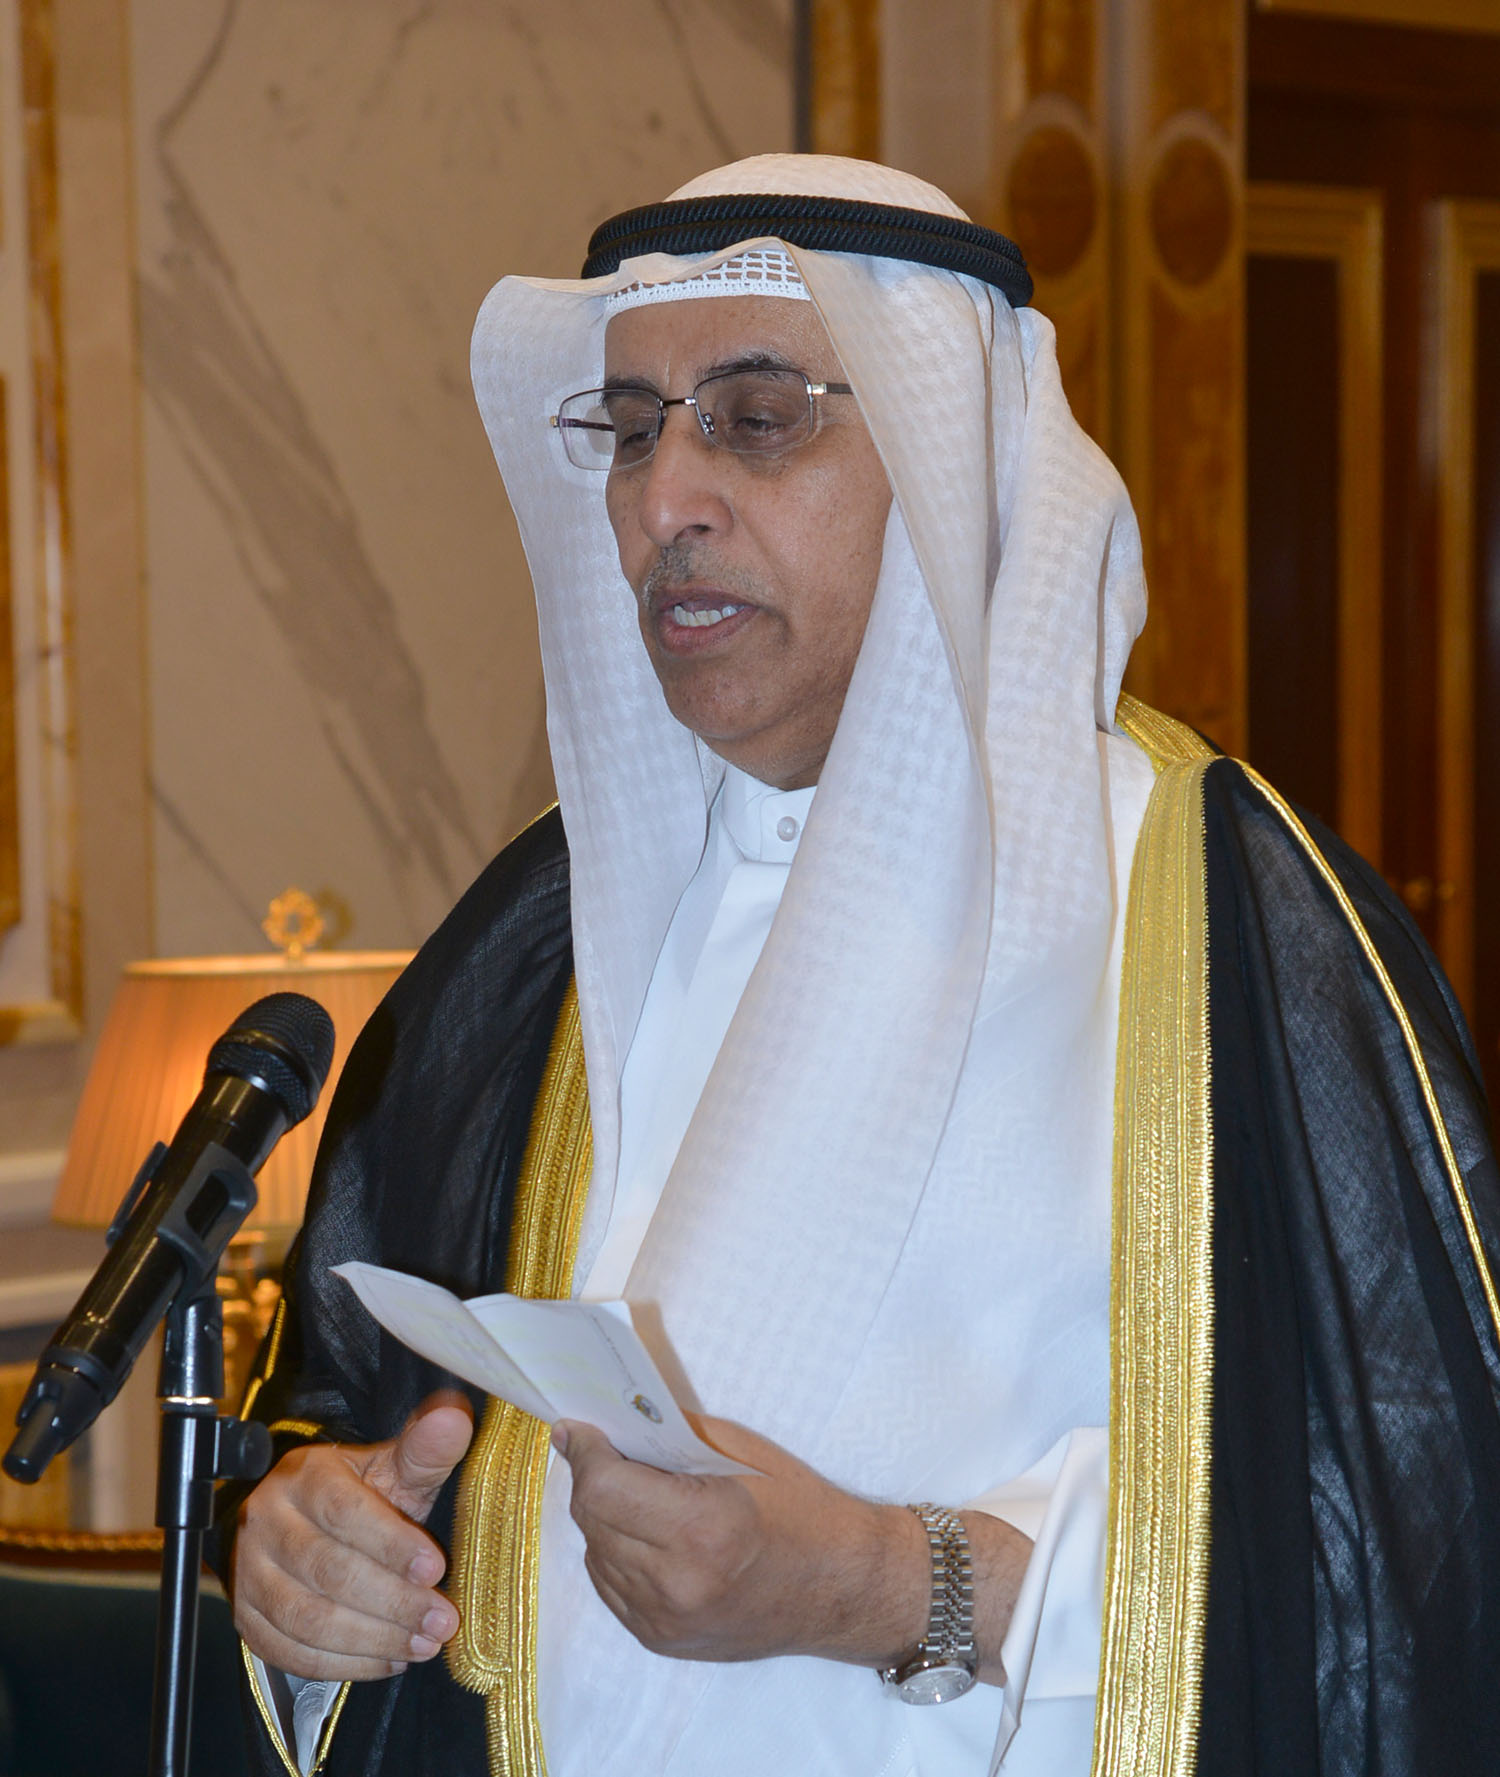  Justice Ali Mutheeb Al-Mutairat Swearing the constitutional oath before His Highness the Amir